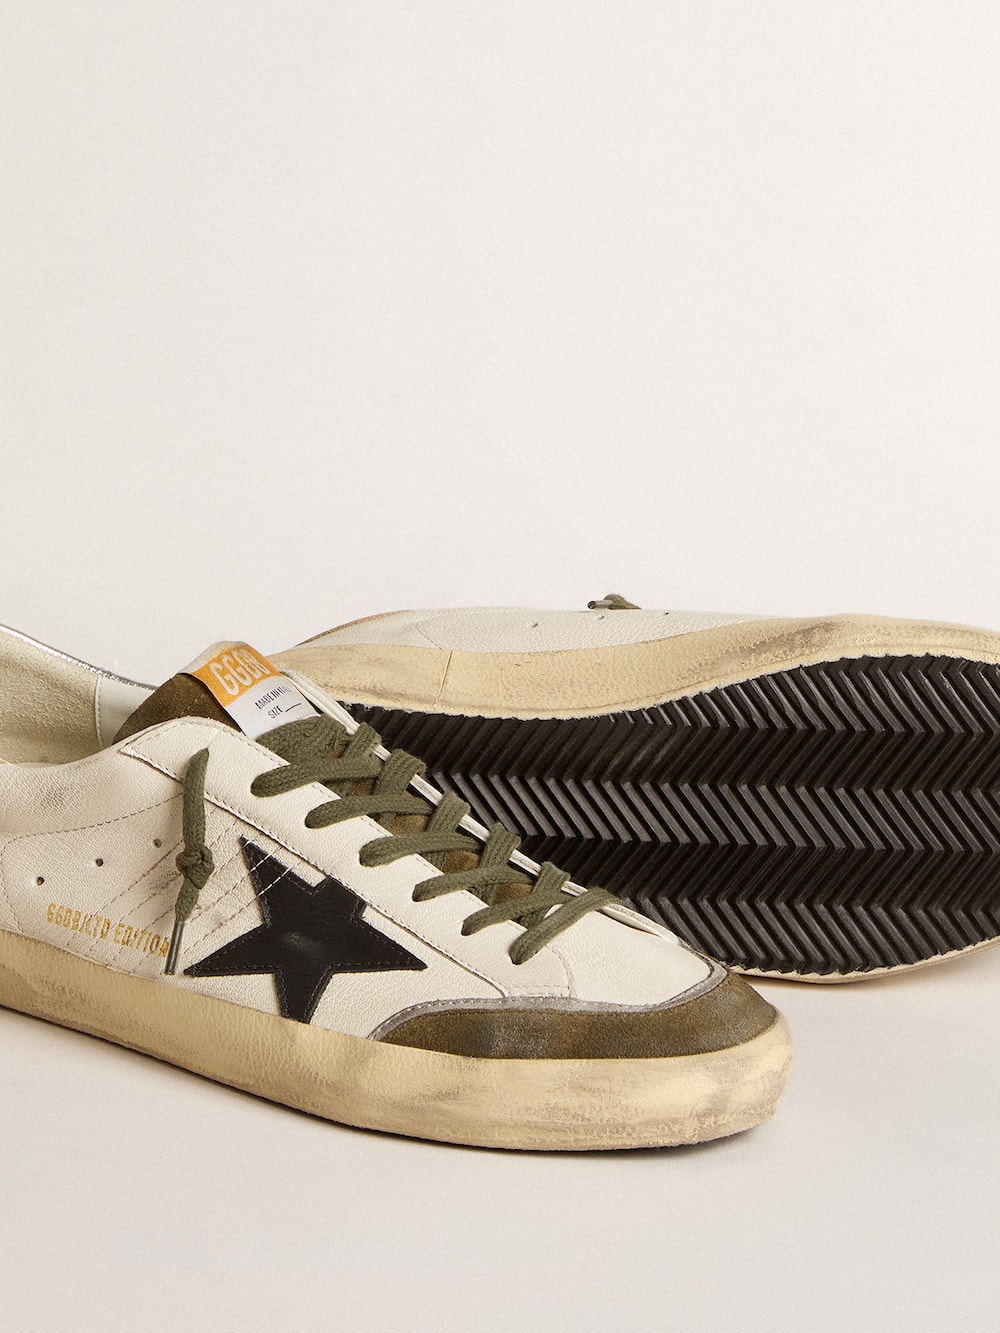 Golden Goose - Men's Super-Star LTD in nappa leather with black leather star and silver heel tab in 